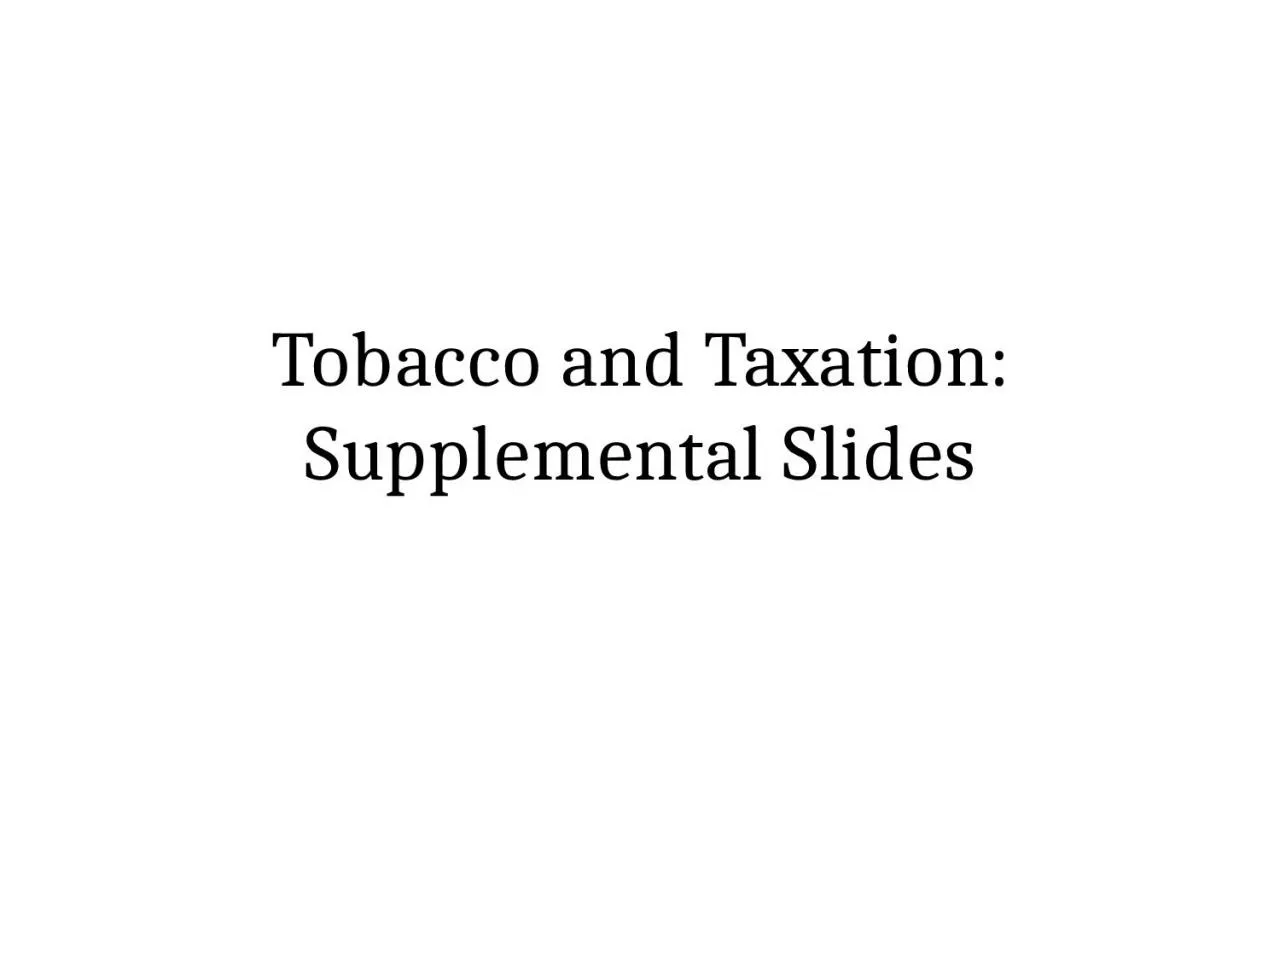 Tobacco and Taxation: Supplemental Slides